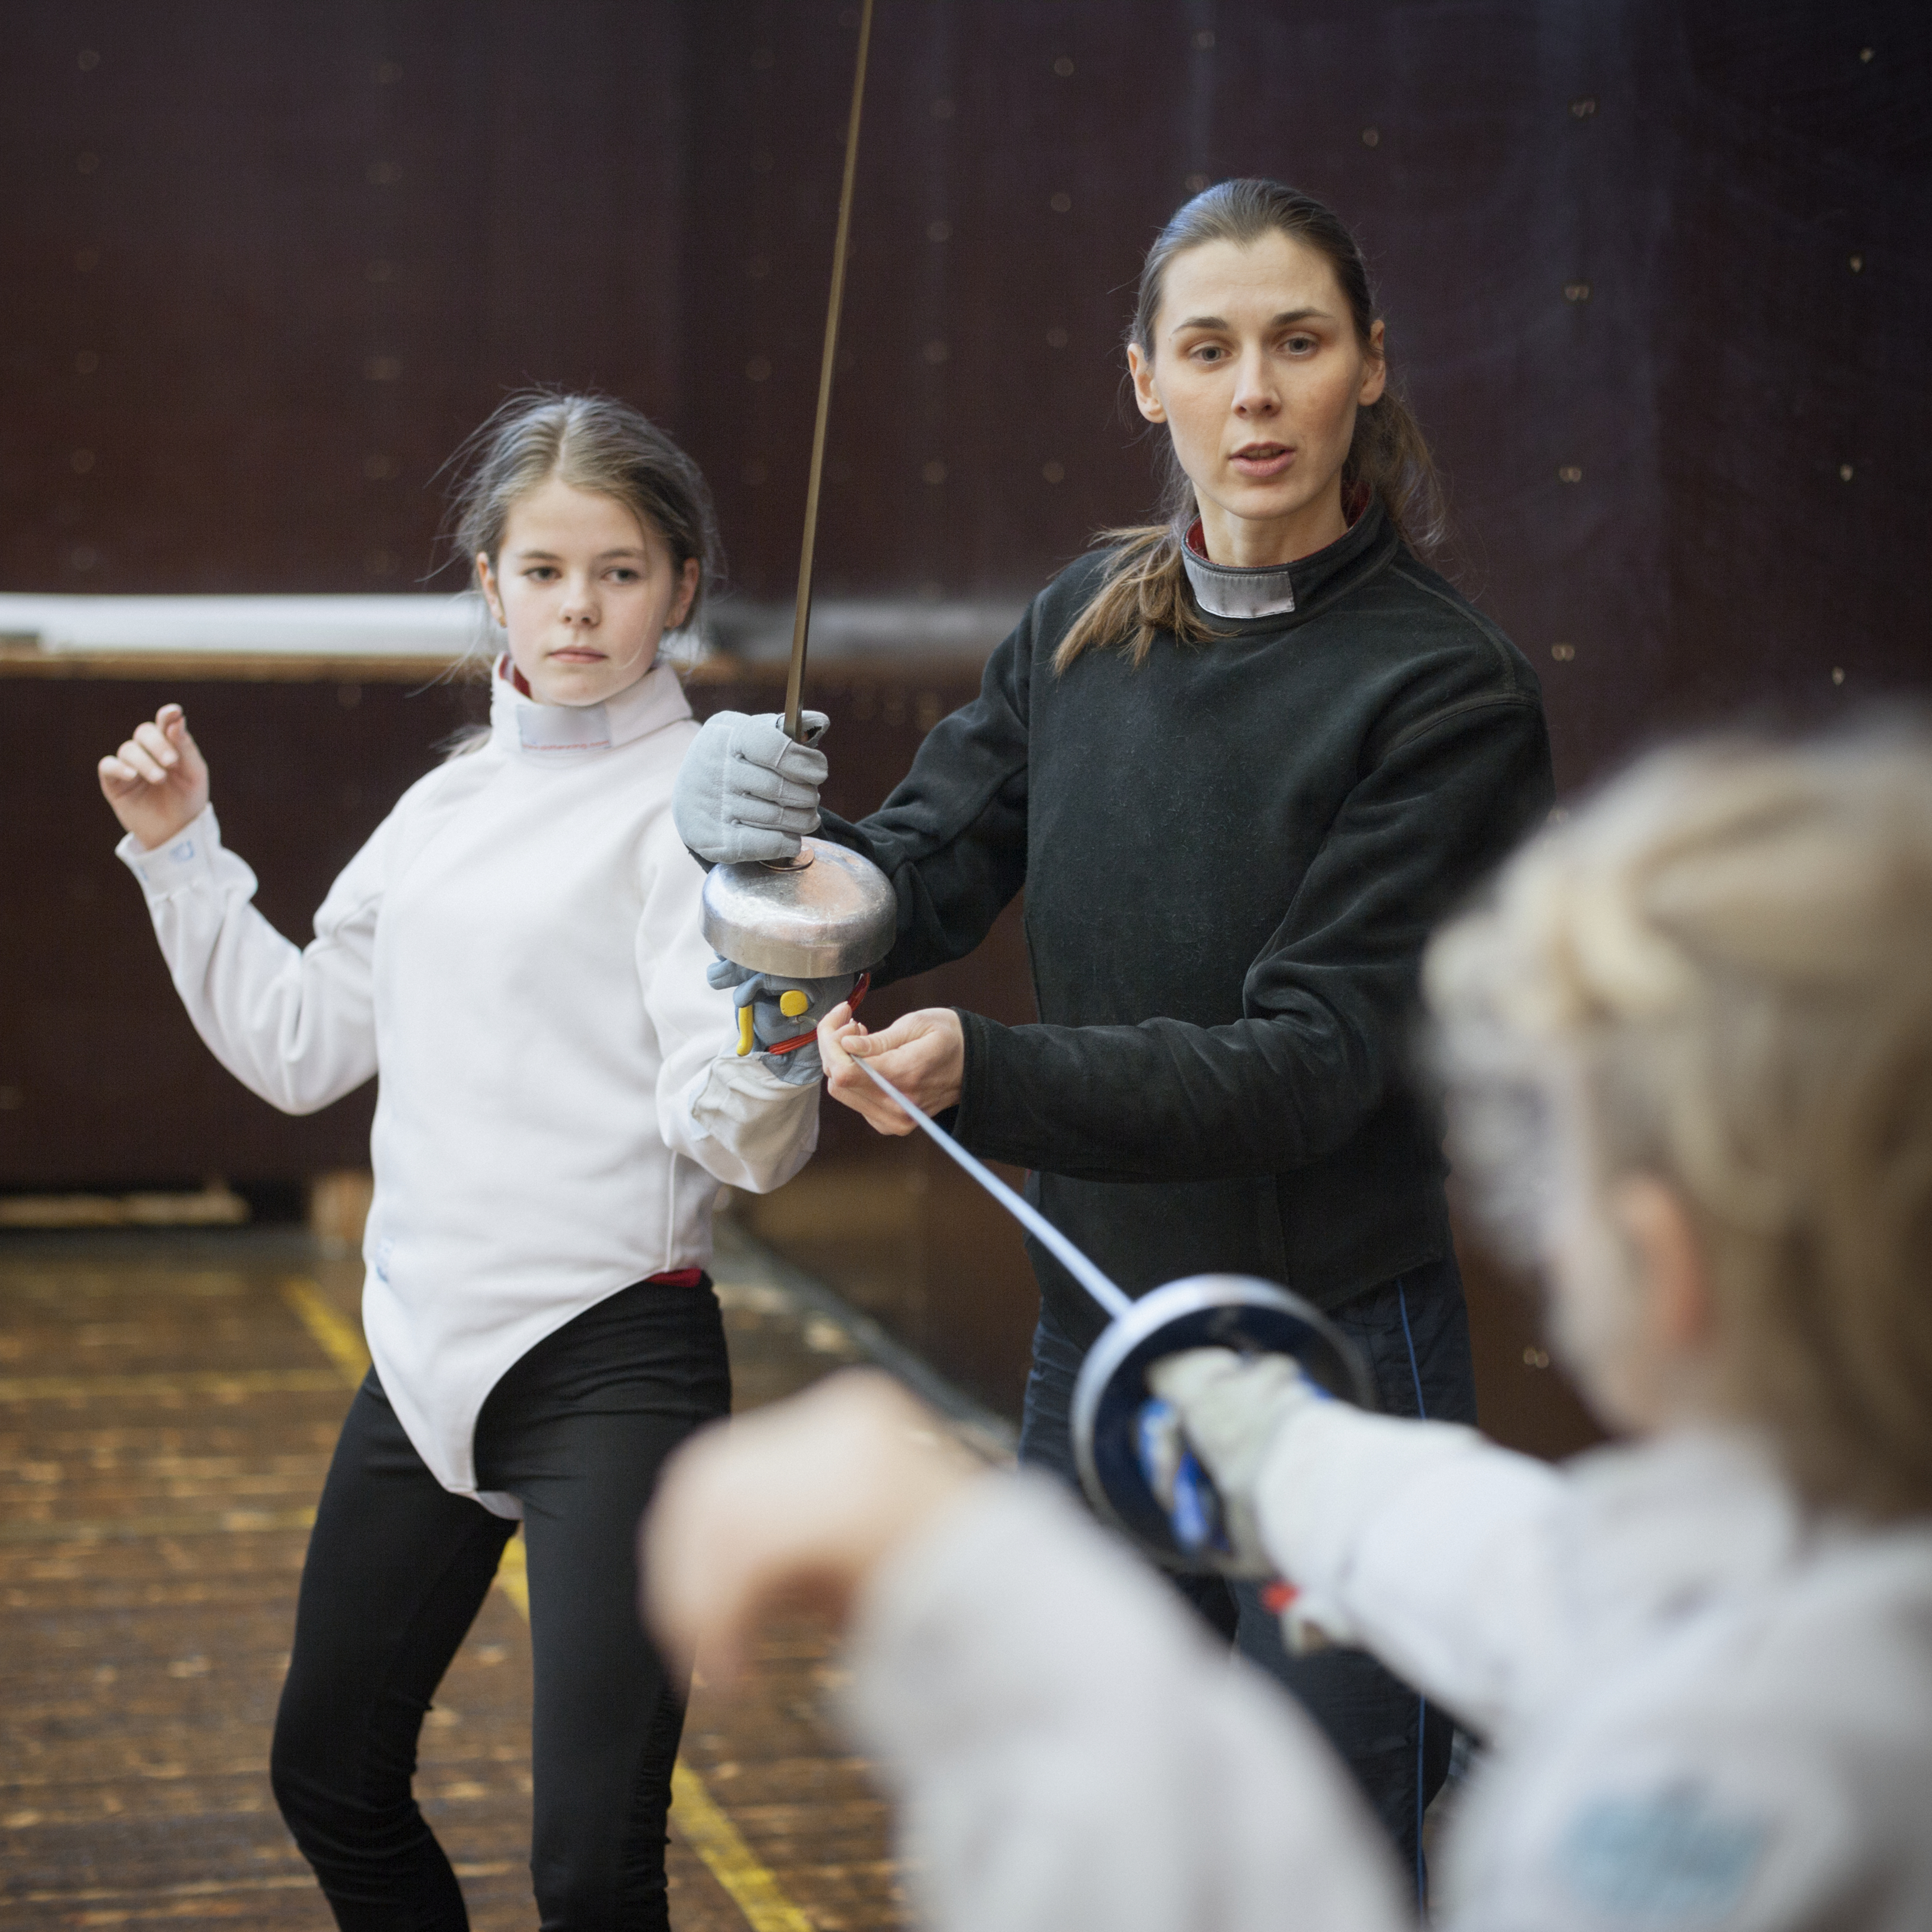 A woman leading a fencing lesson